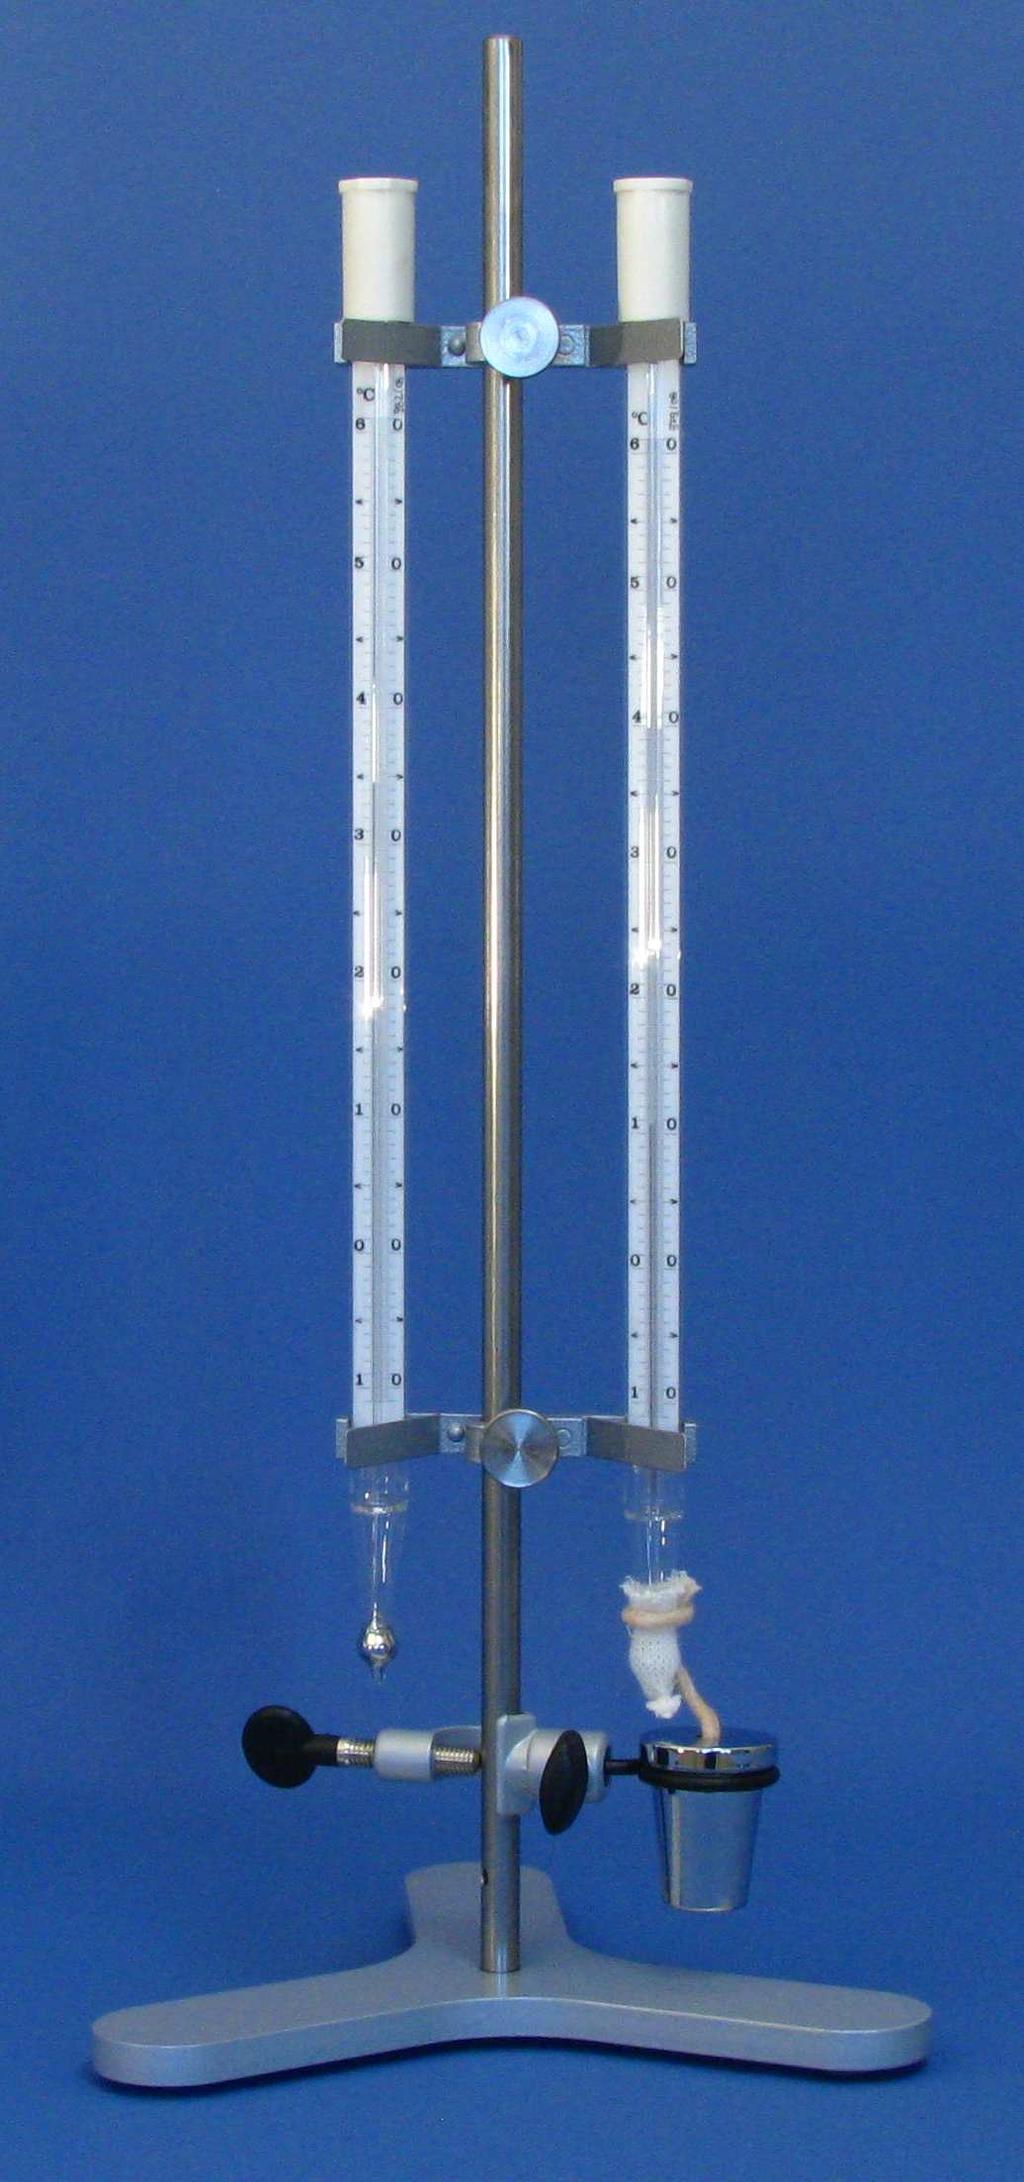 Psychrometers consist of two eq